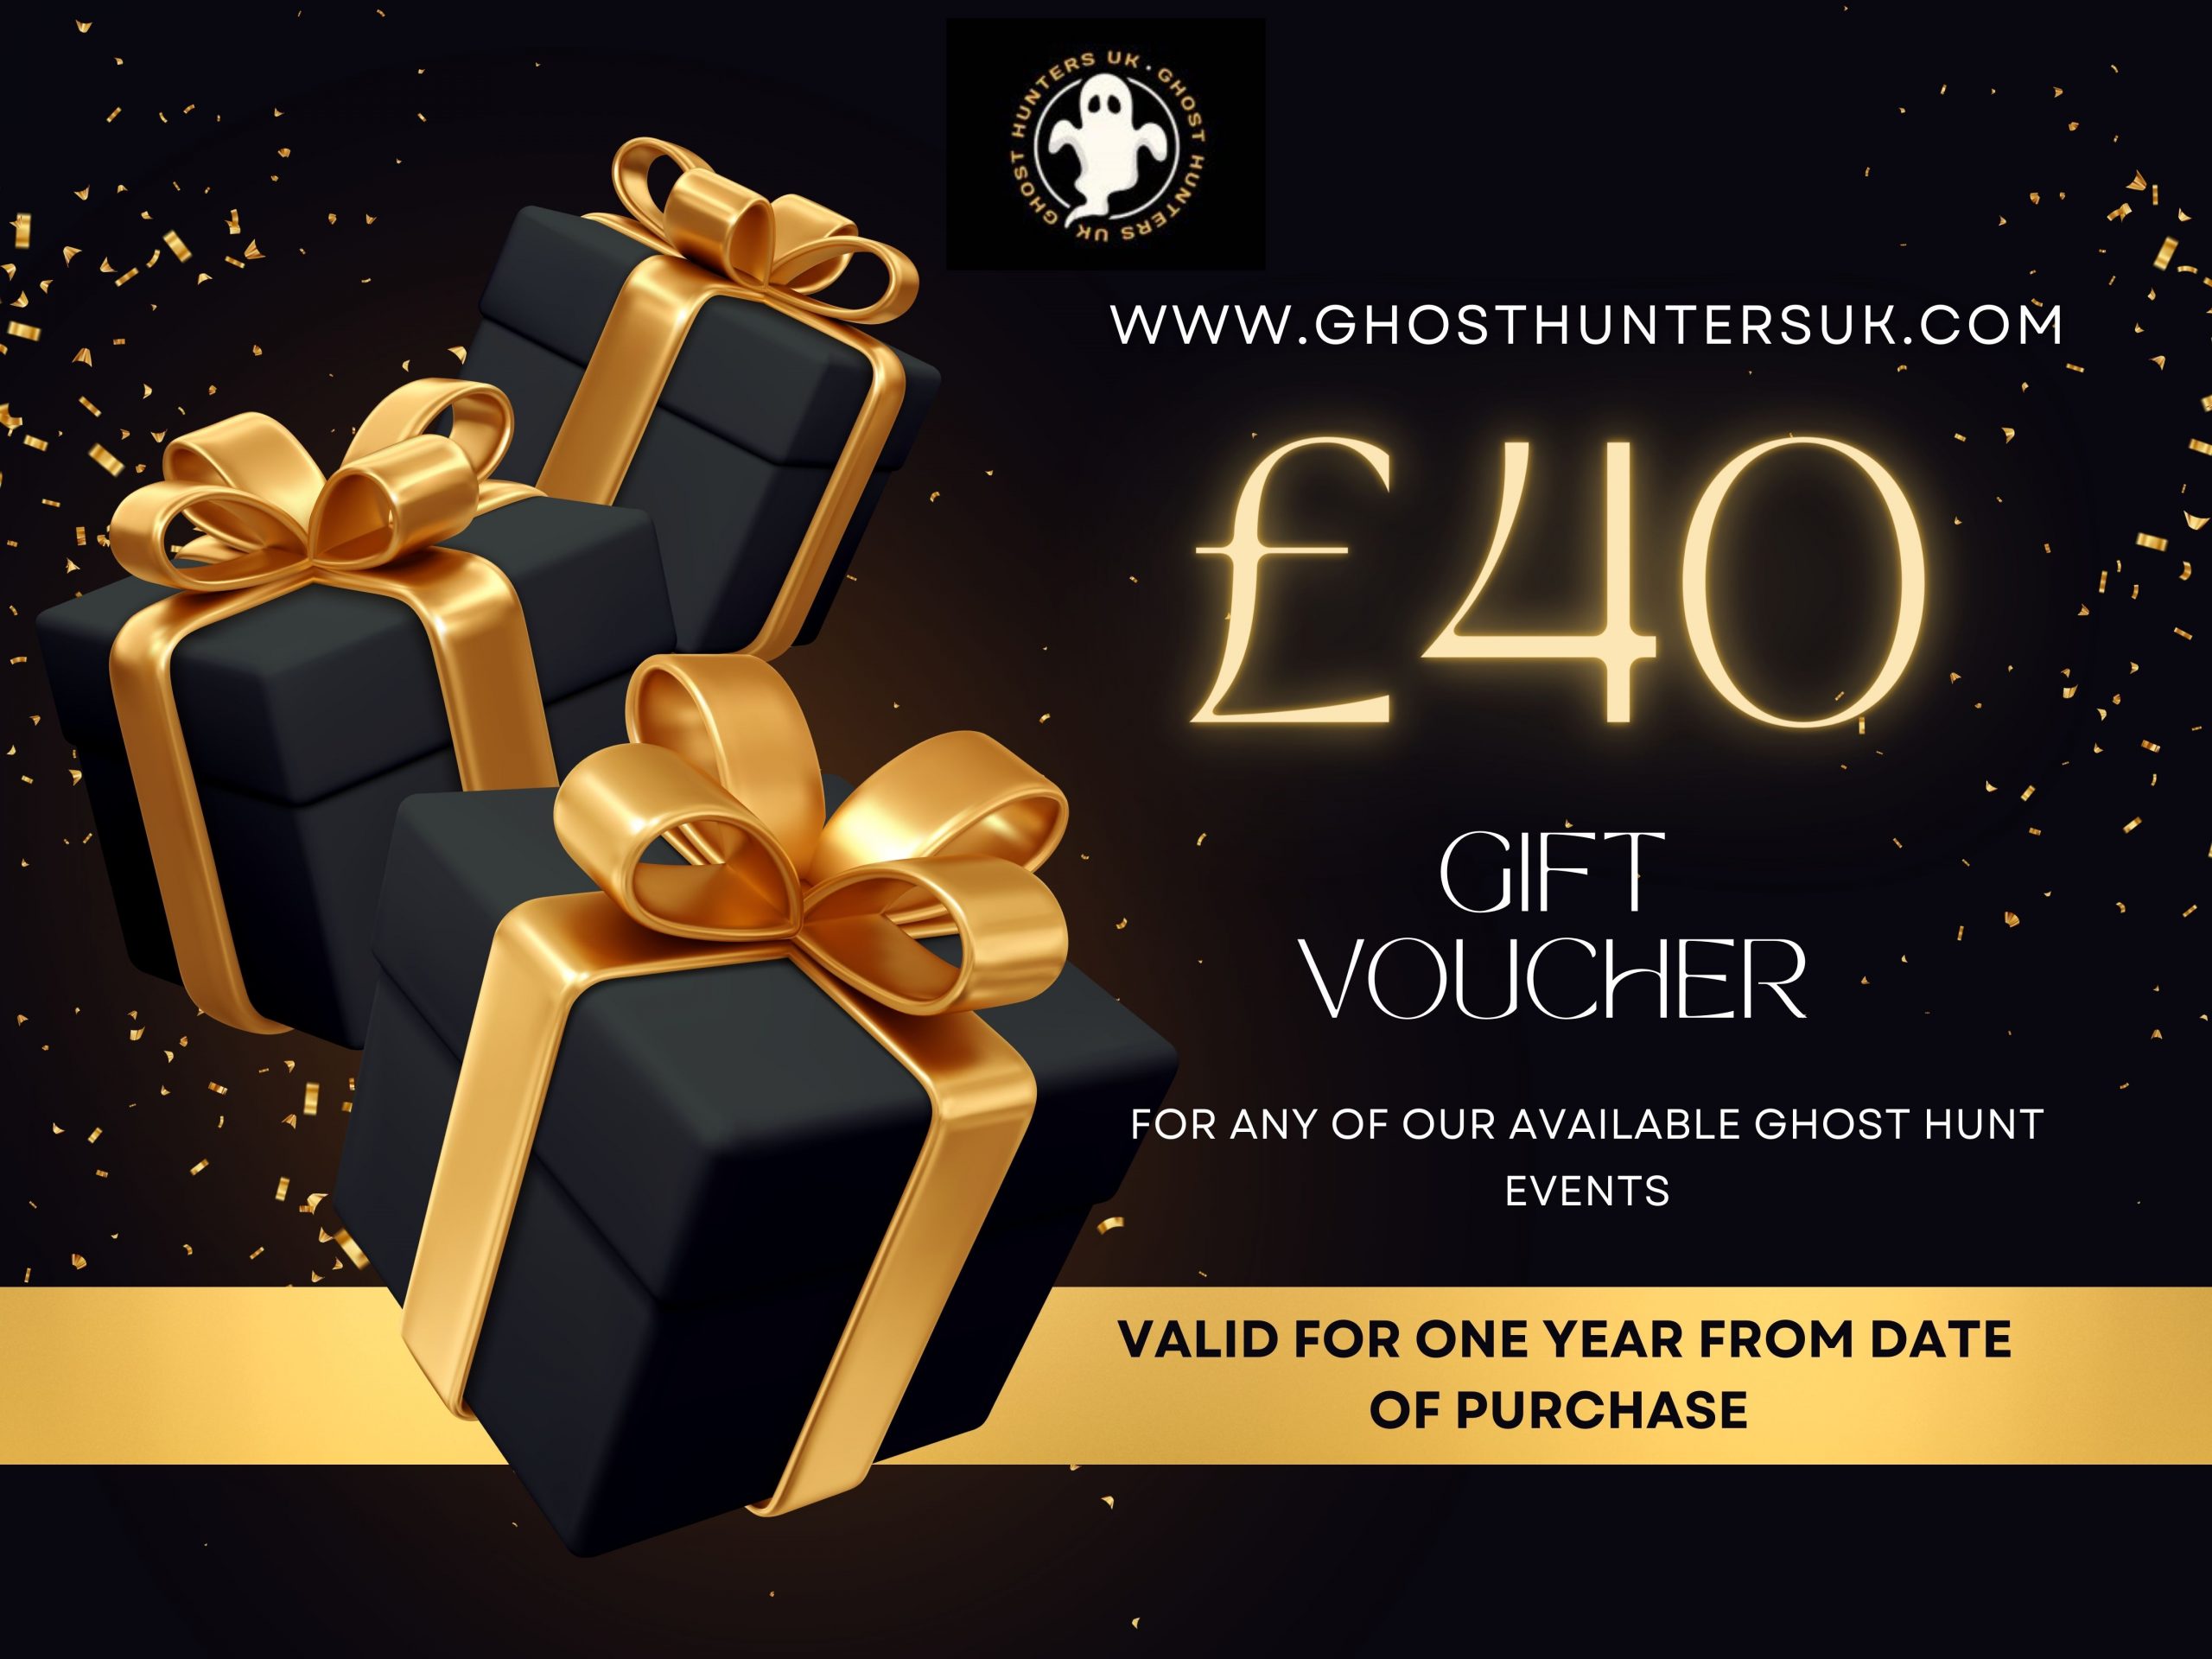 £40 Ghost Hunting Gift Voucher